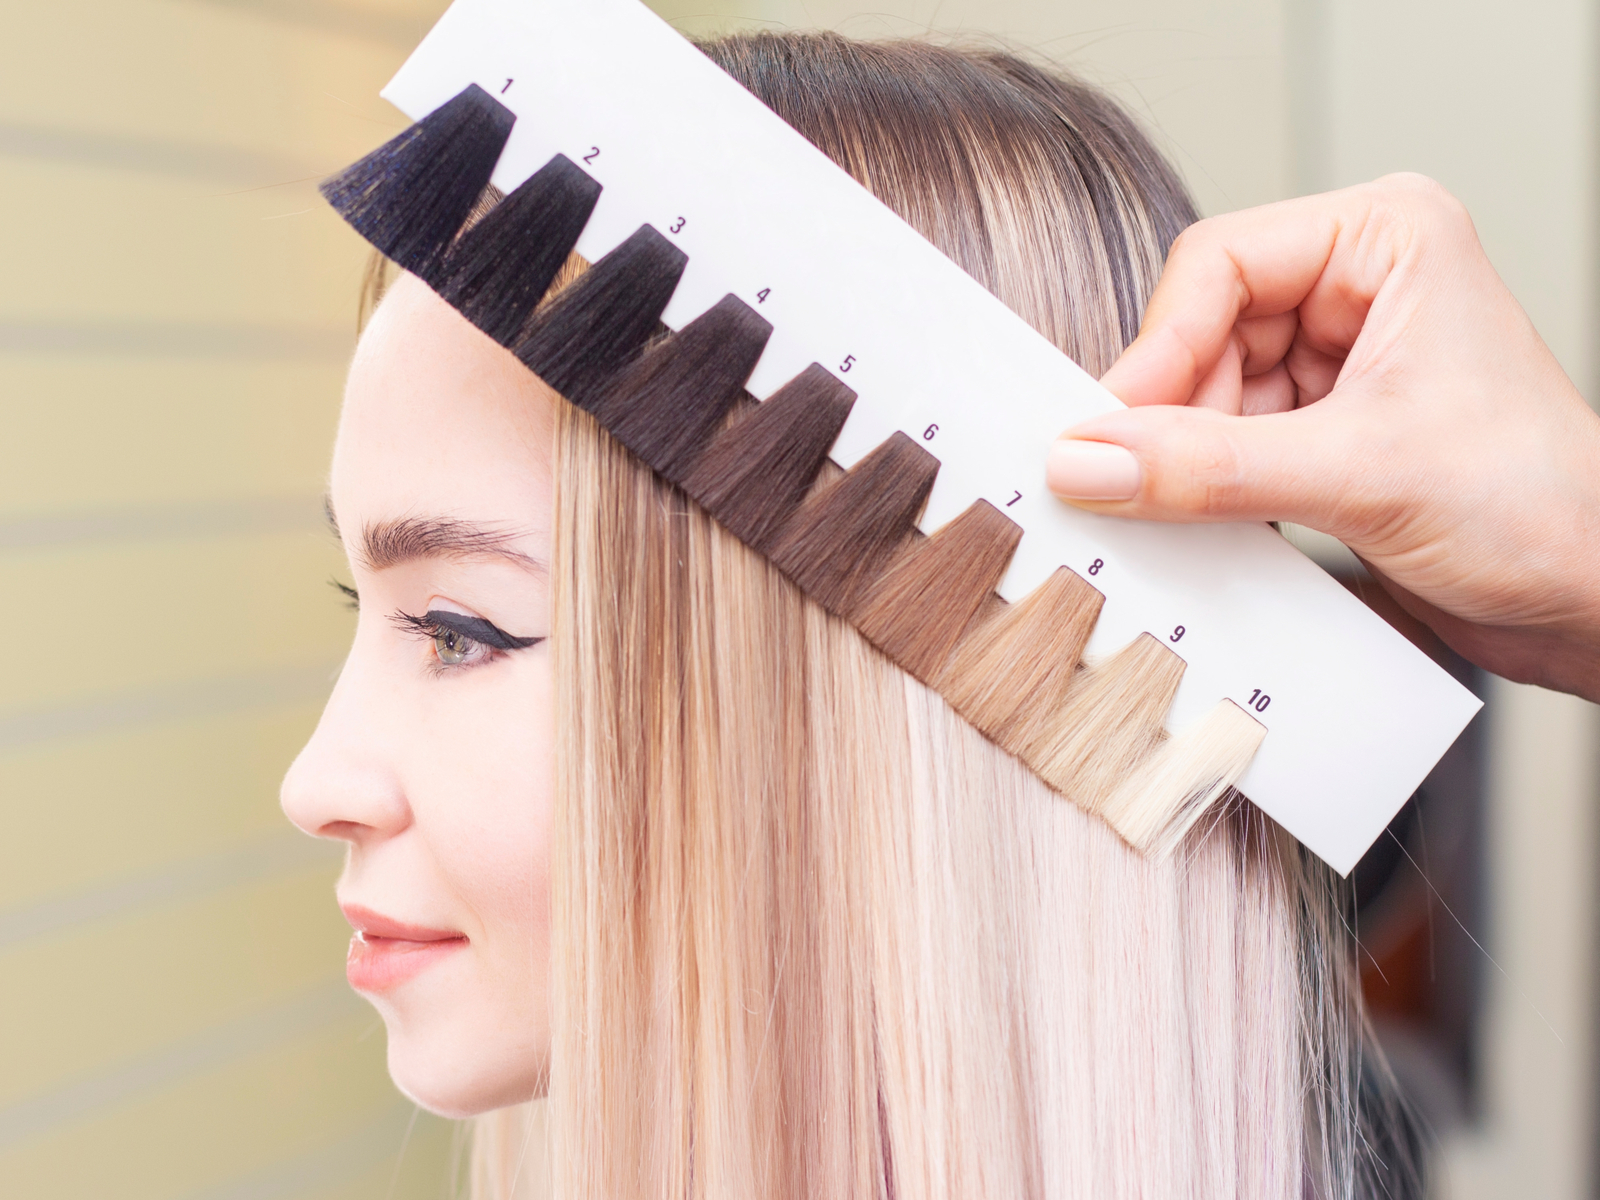 Woman using the color wheel hair theory to find shades of color that work on her by holding up swatches of dyed hair to her head